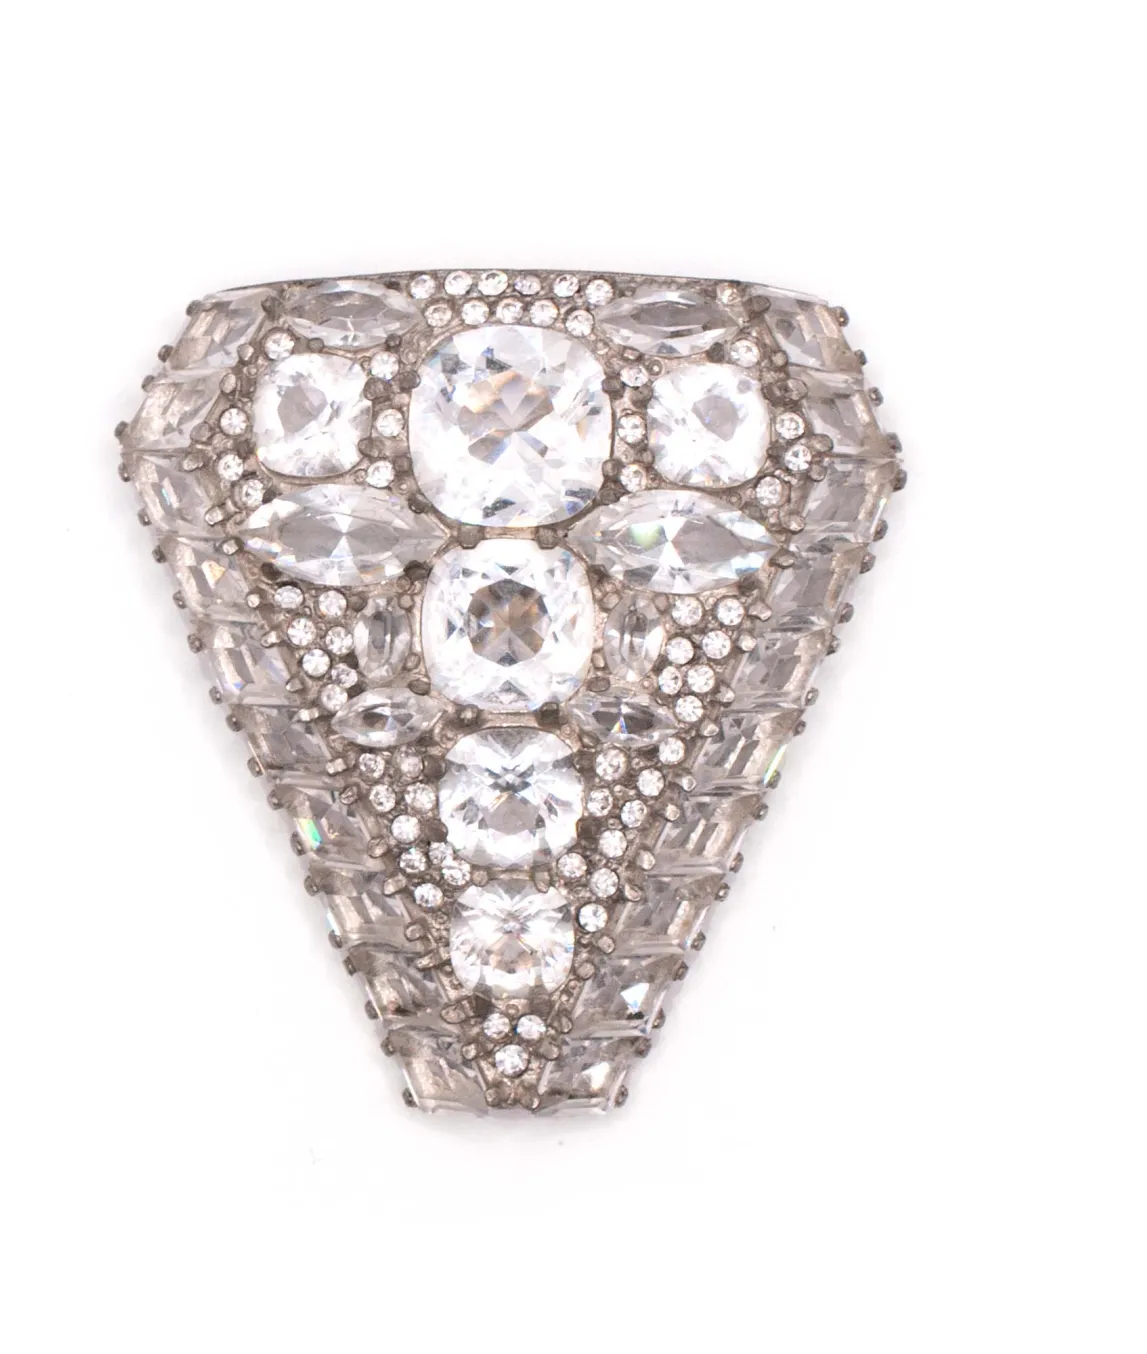 Large Eisenberg Original shield shaped dress clip with clear crystals